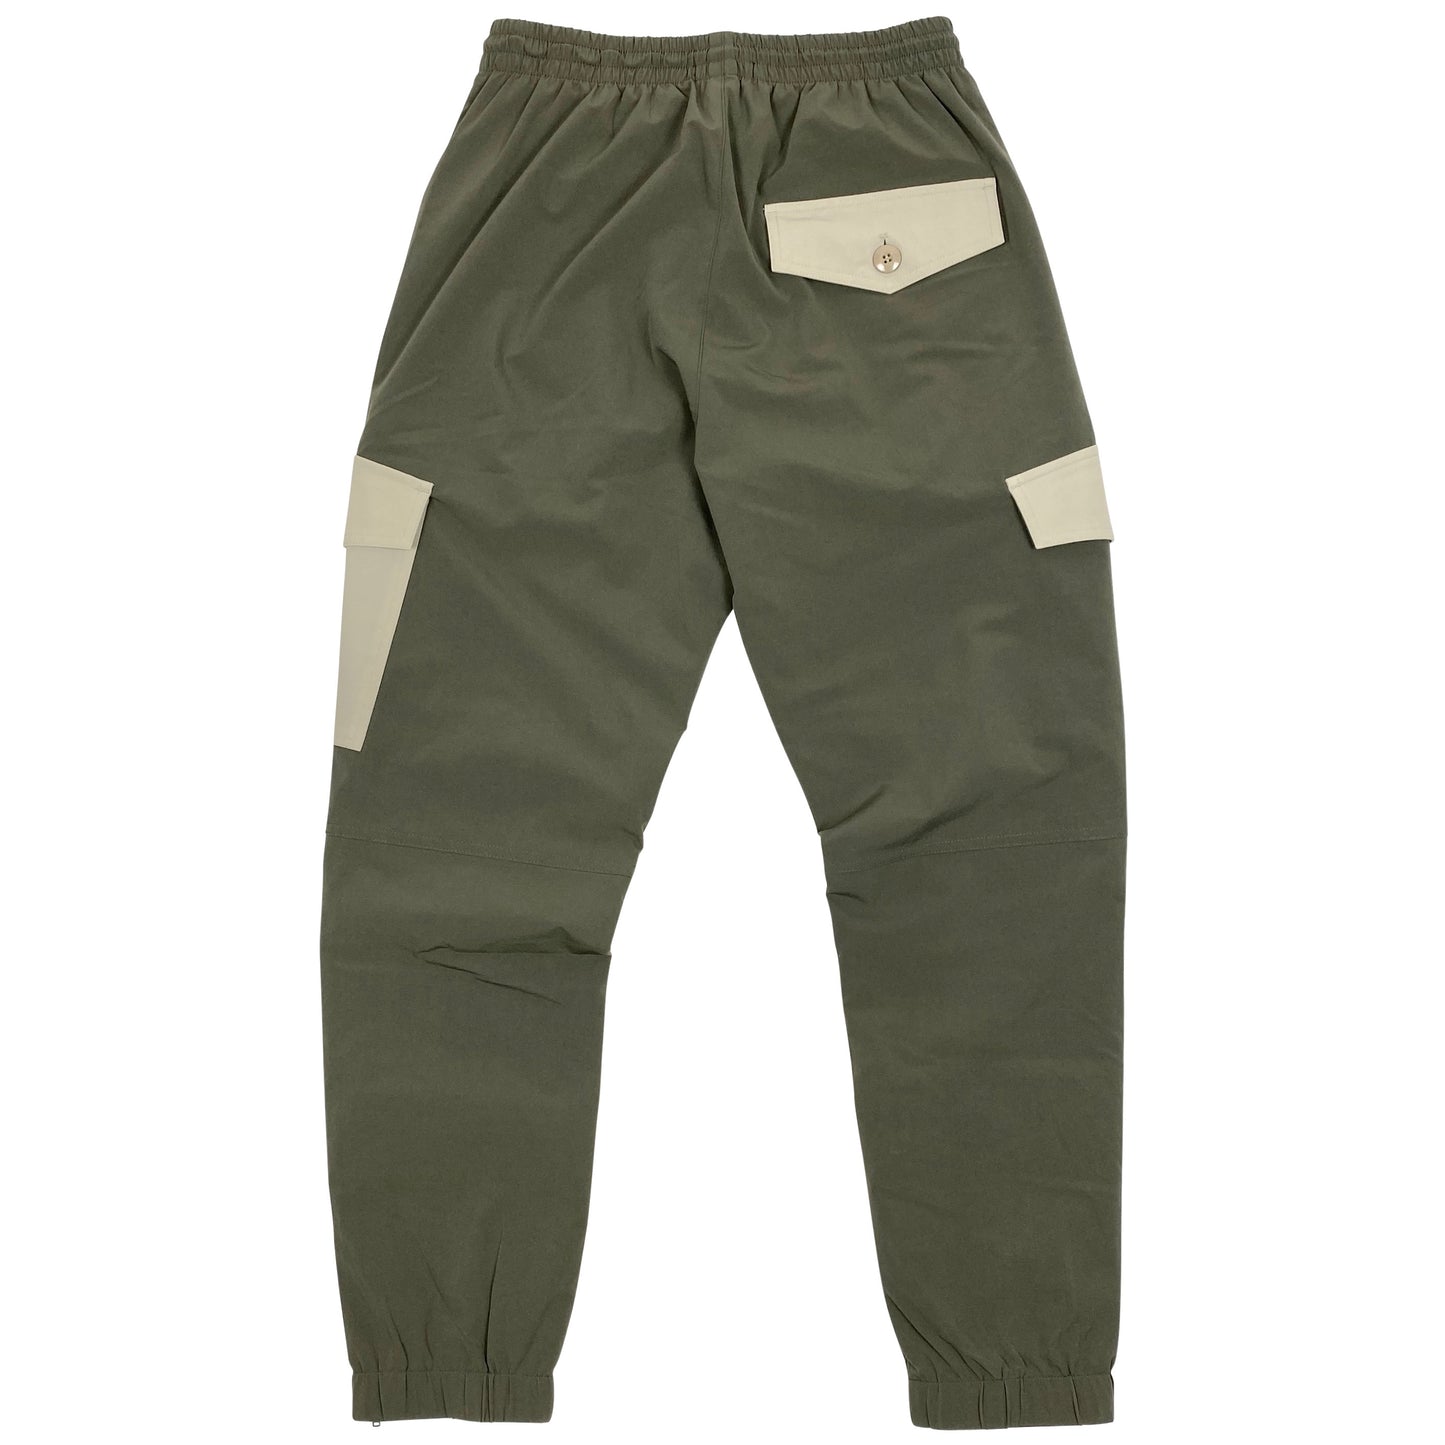 Angled Cargo Pant - Matte Olive